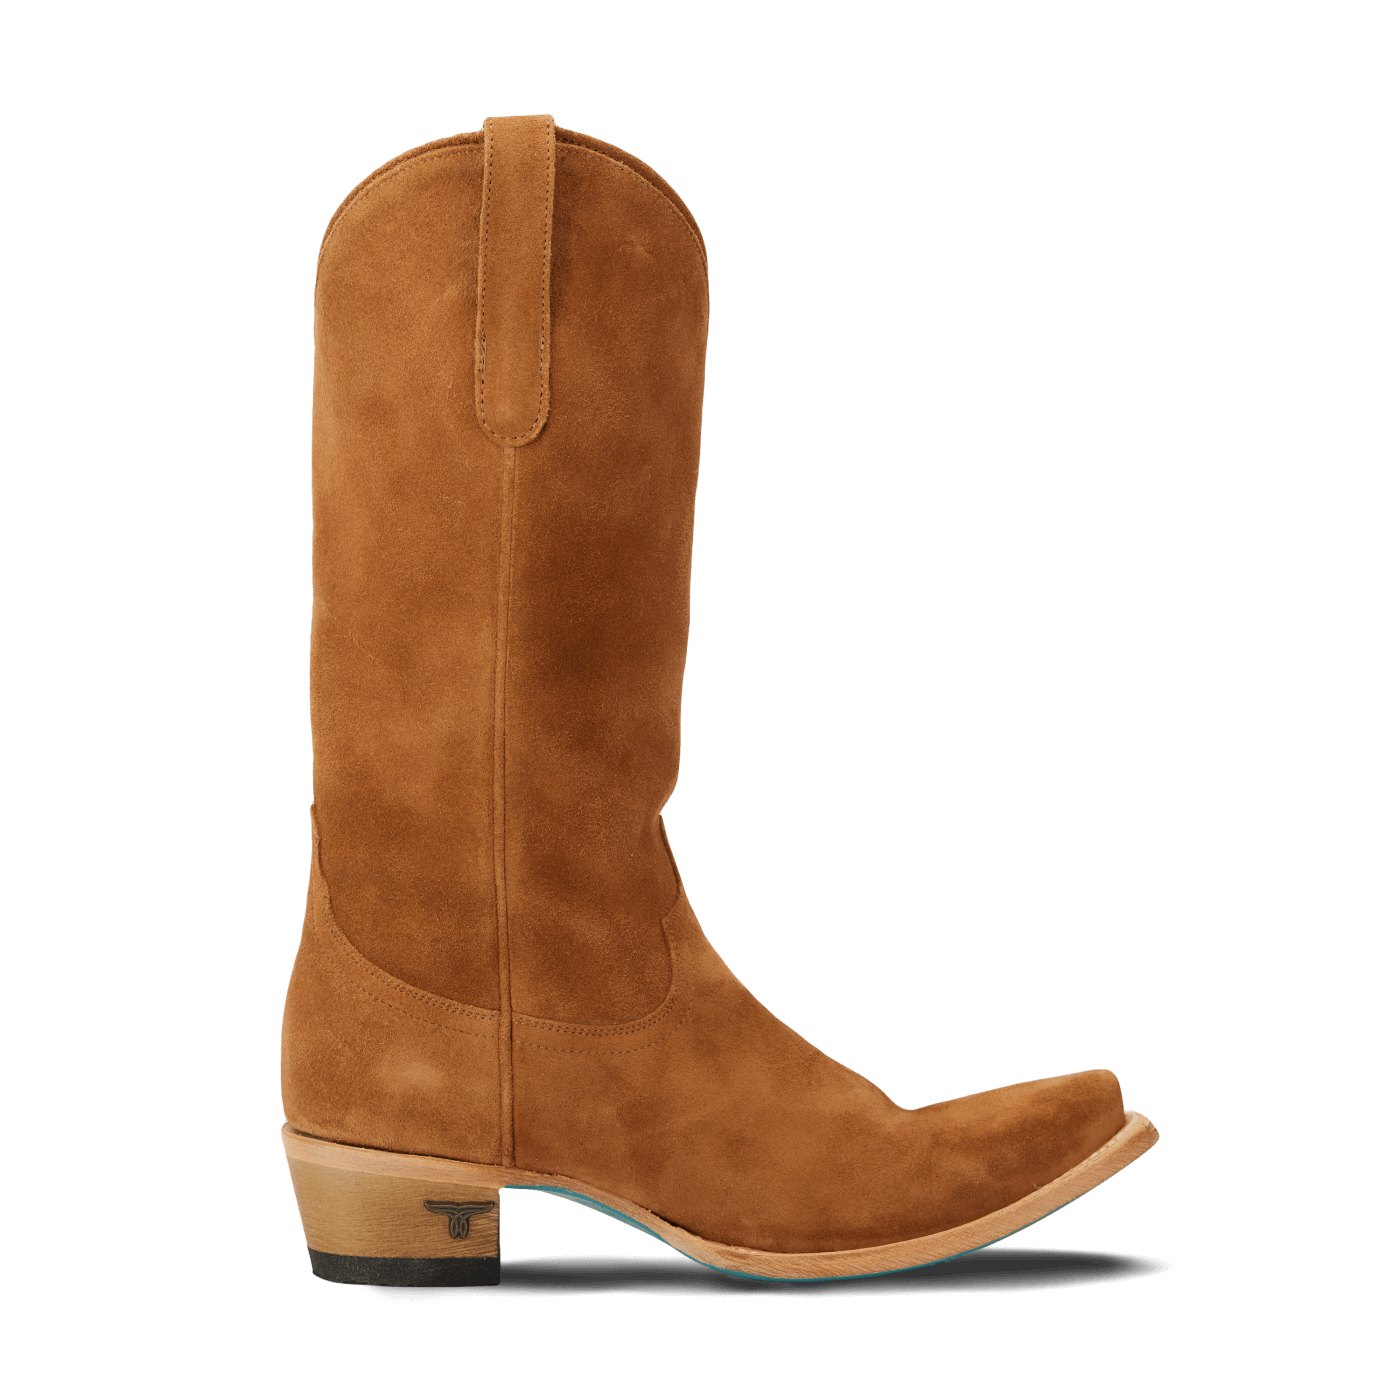 simple cowboy boots toffee suede